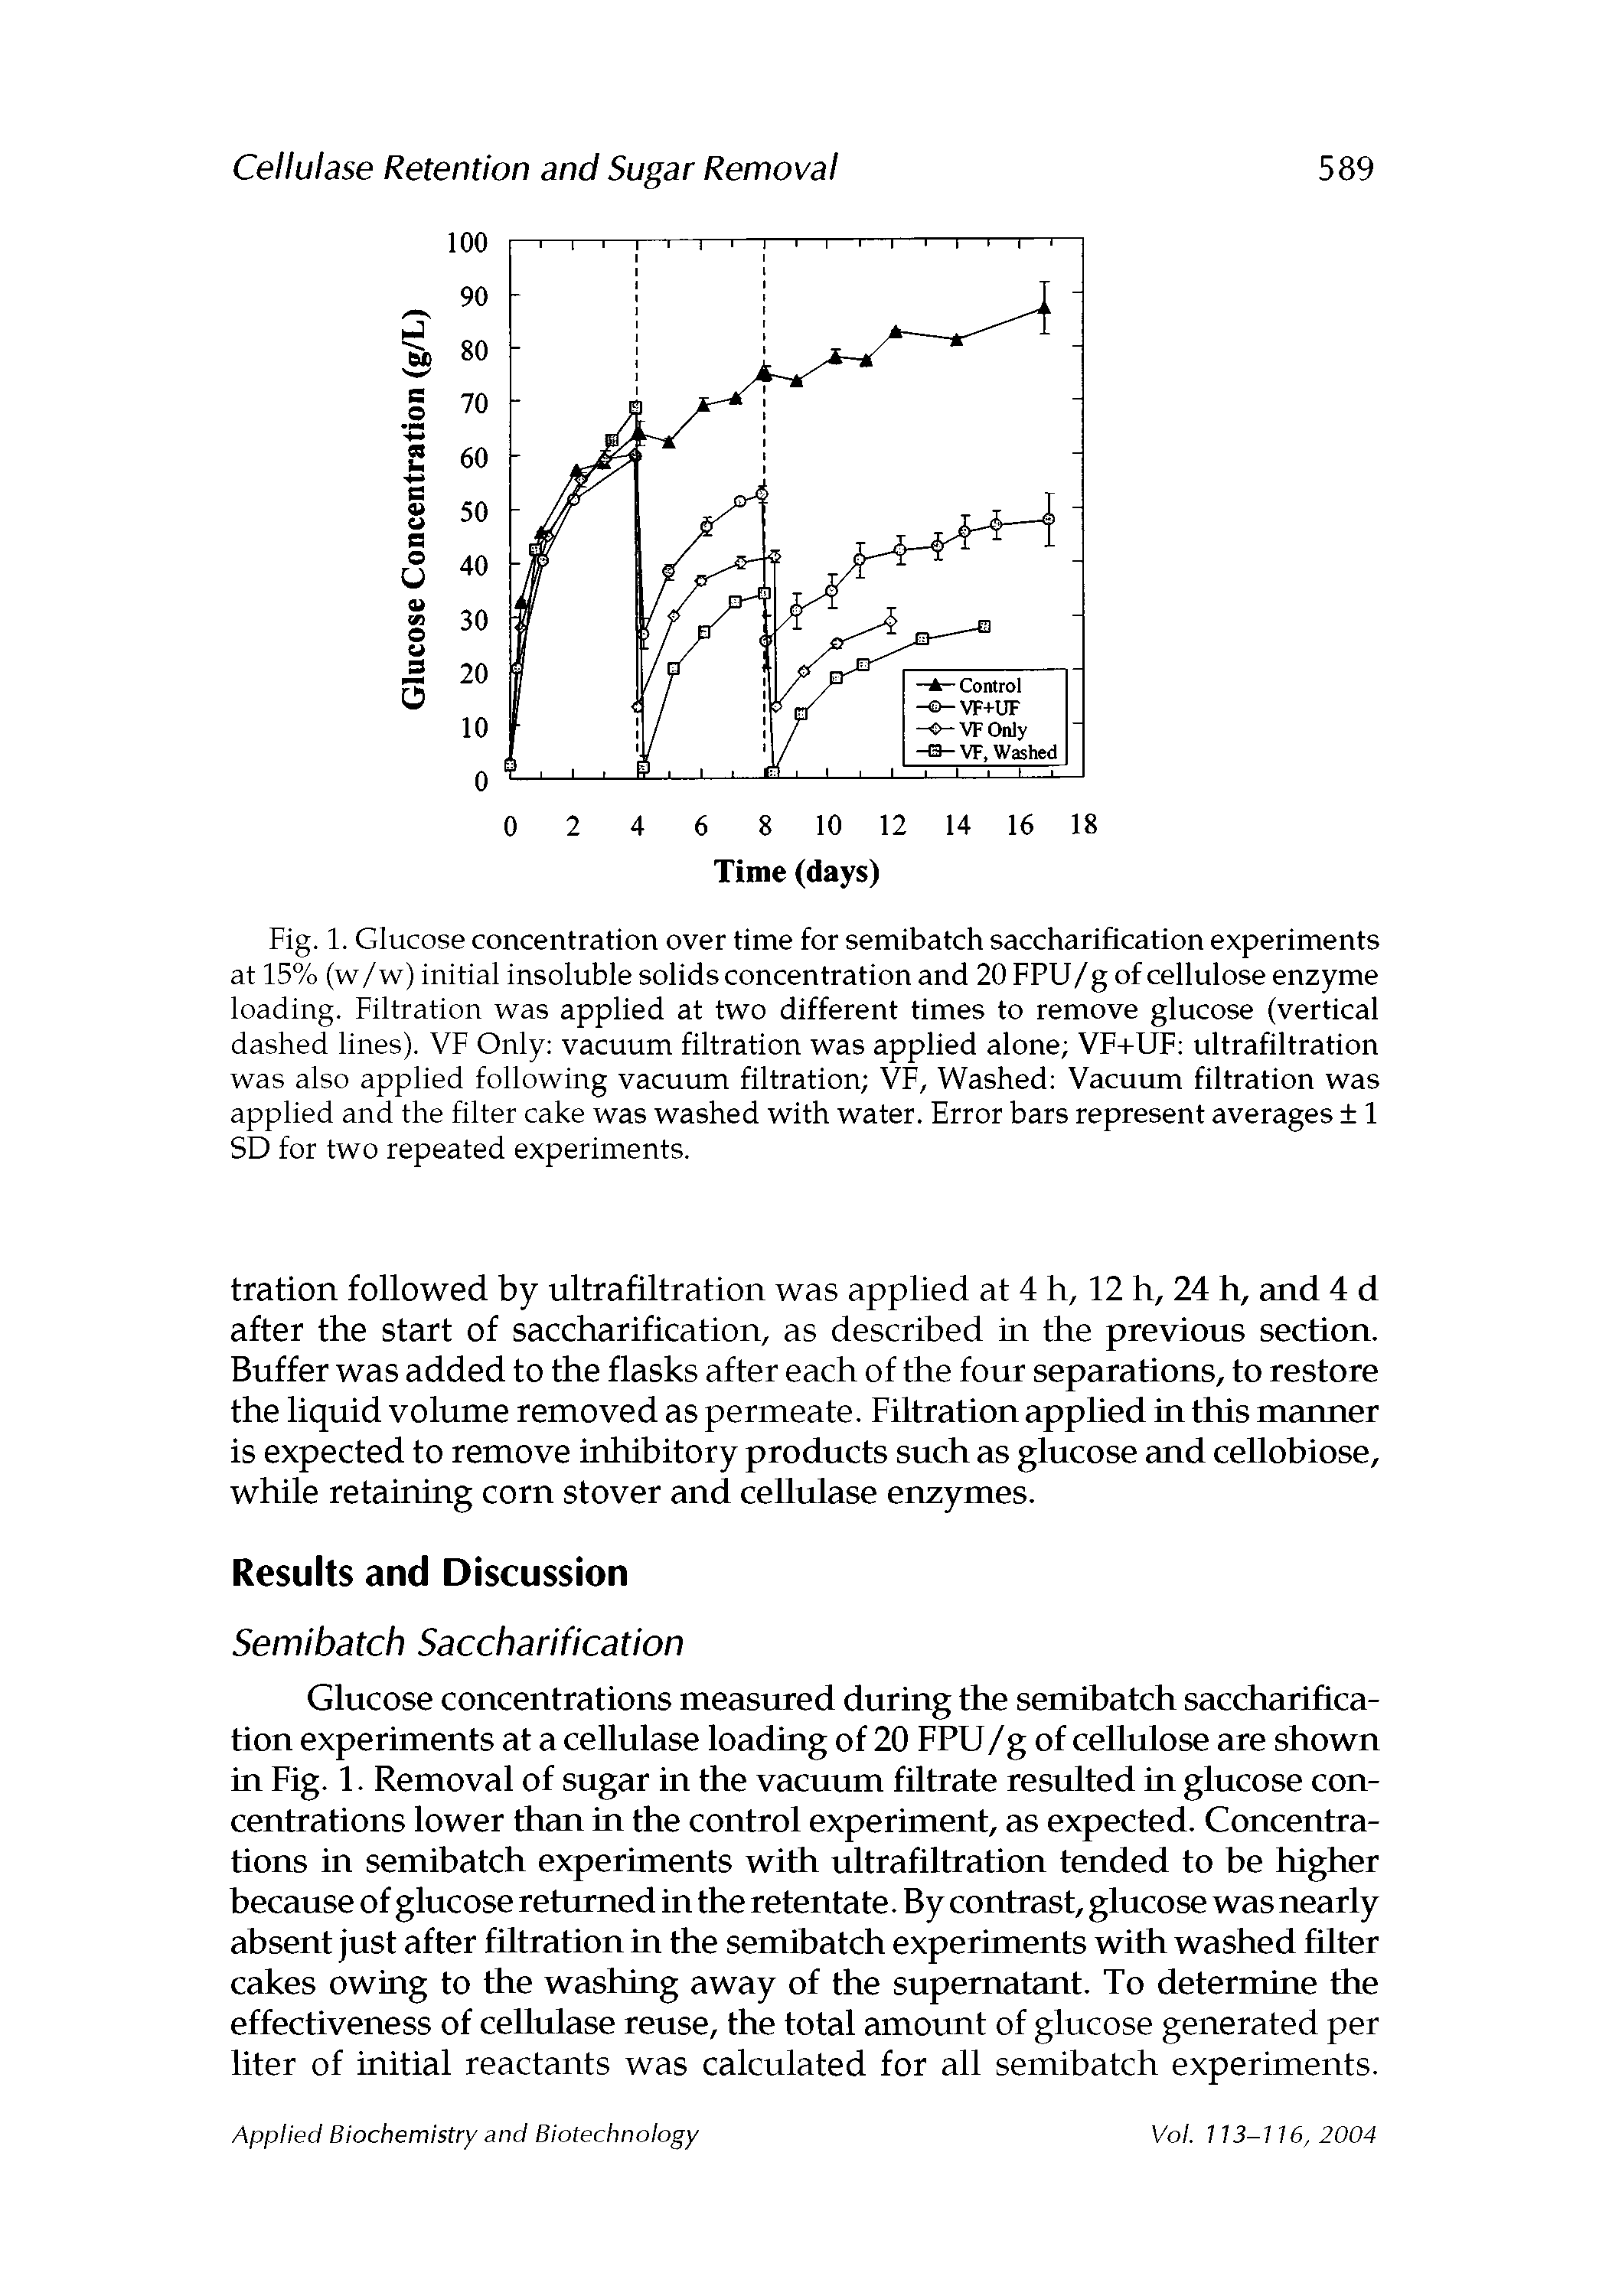 Fig. 1. Glucose concentration over time for semibatch saccharification experiments at 15% (w/w) initial insoluble solids concentration and 20 FPU/g of cellulose enzyme loading. Filtration was applied at two different times to remove glucose (vertical dashed lines). VF Only vacuum filtration was applied alone VF+UF ultrafiltration was also applied following vacuum filtration VF, Washed Vacuum filtration was applied and the filter cake was washed with water. Error bars represent averages 1 SD for two repeated experiments.